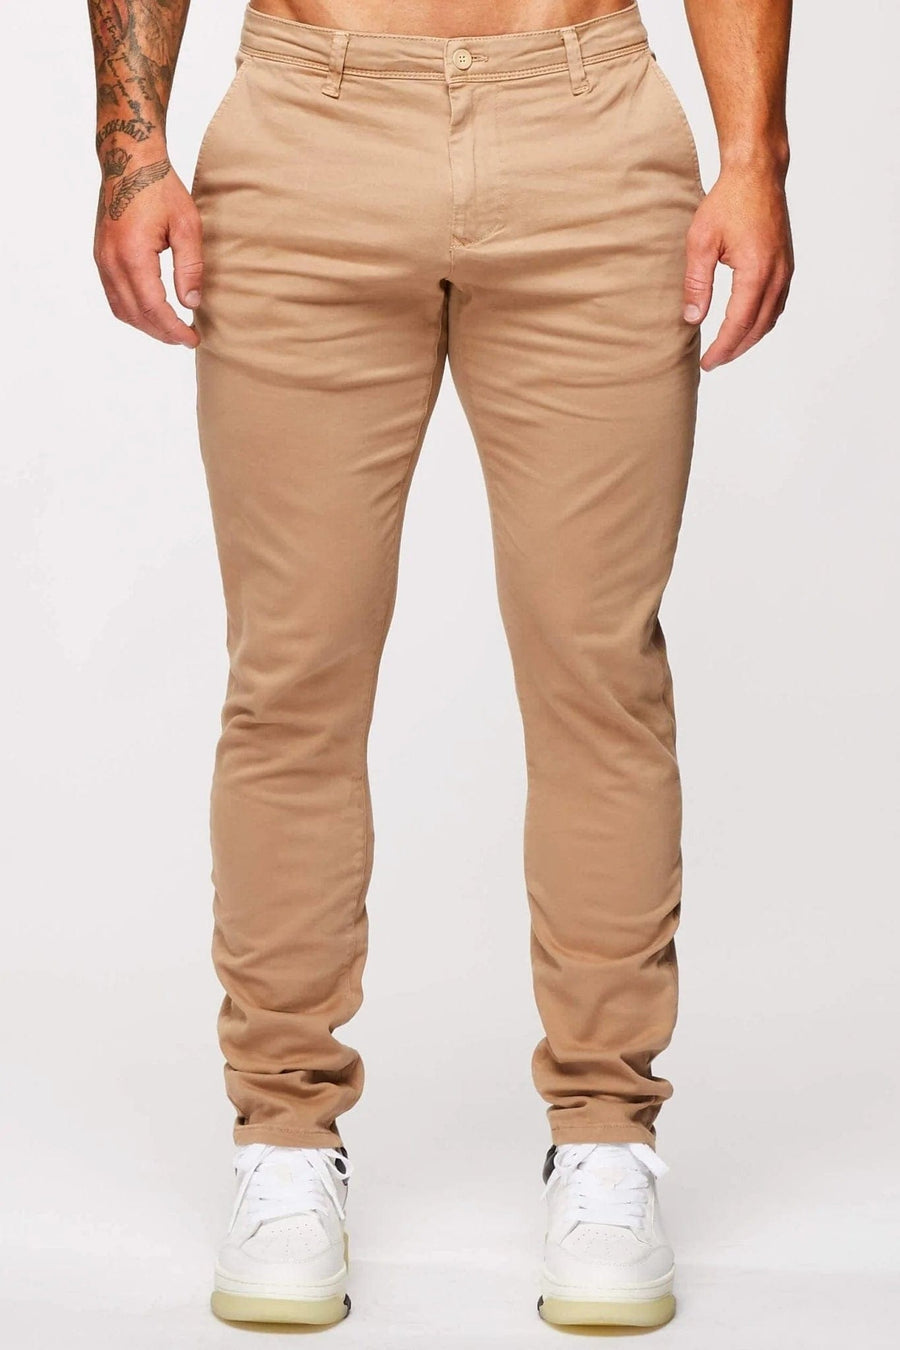 How to Wear Beige Pants  7 Beige Pant Outfit Ideas